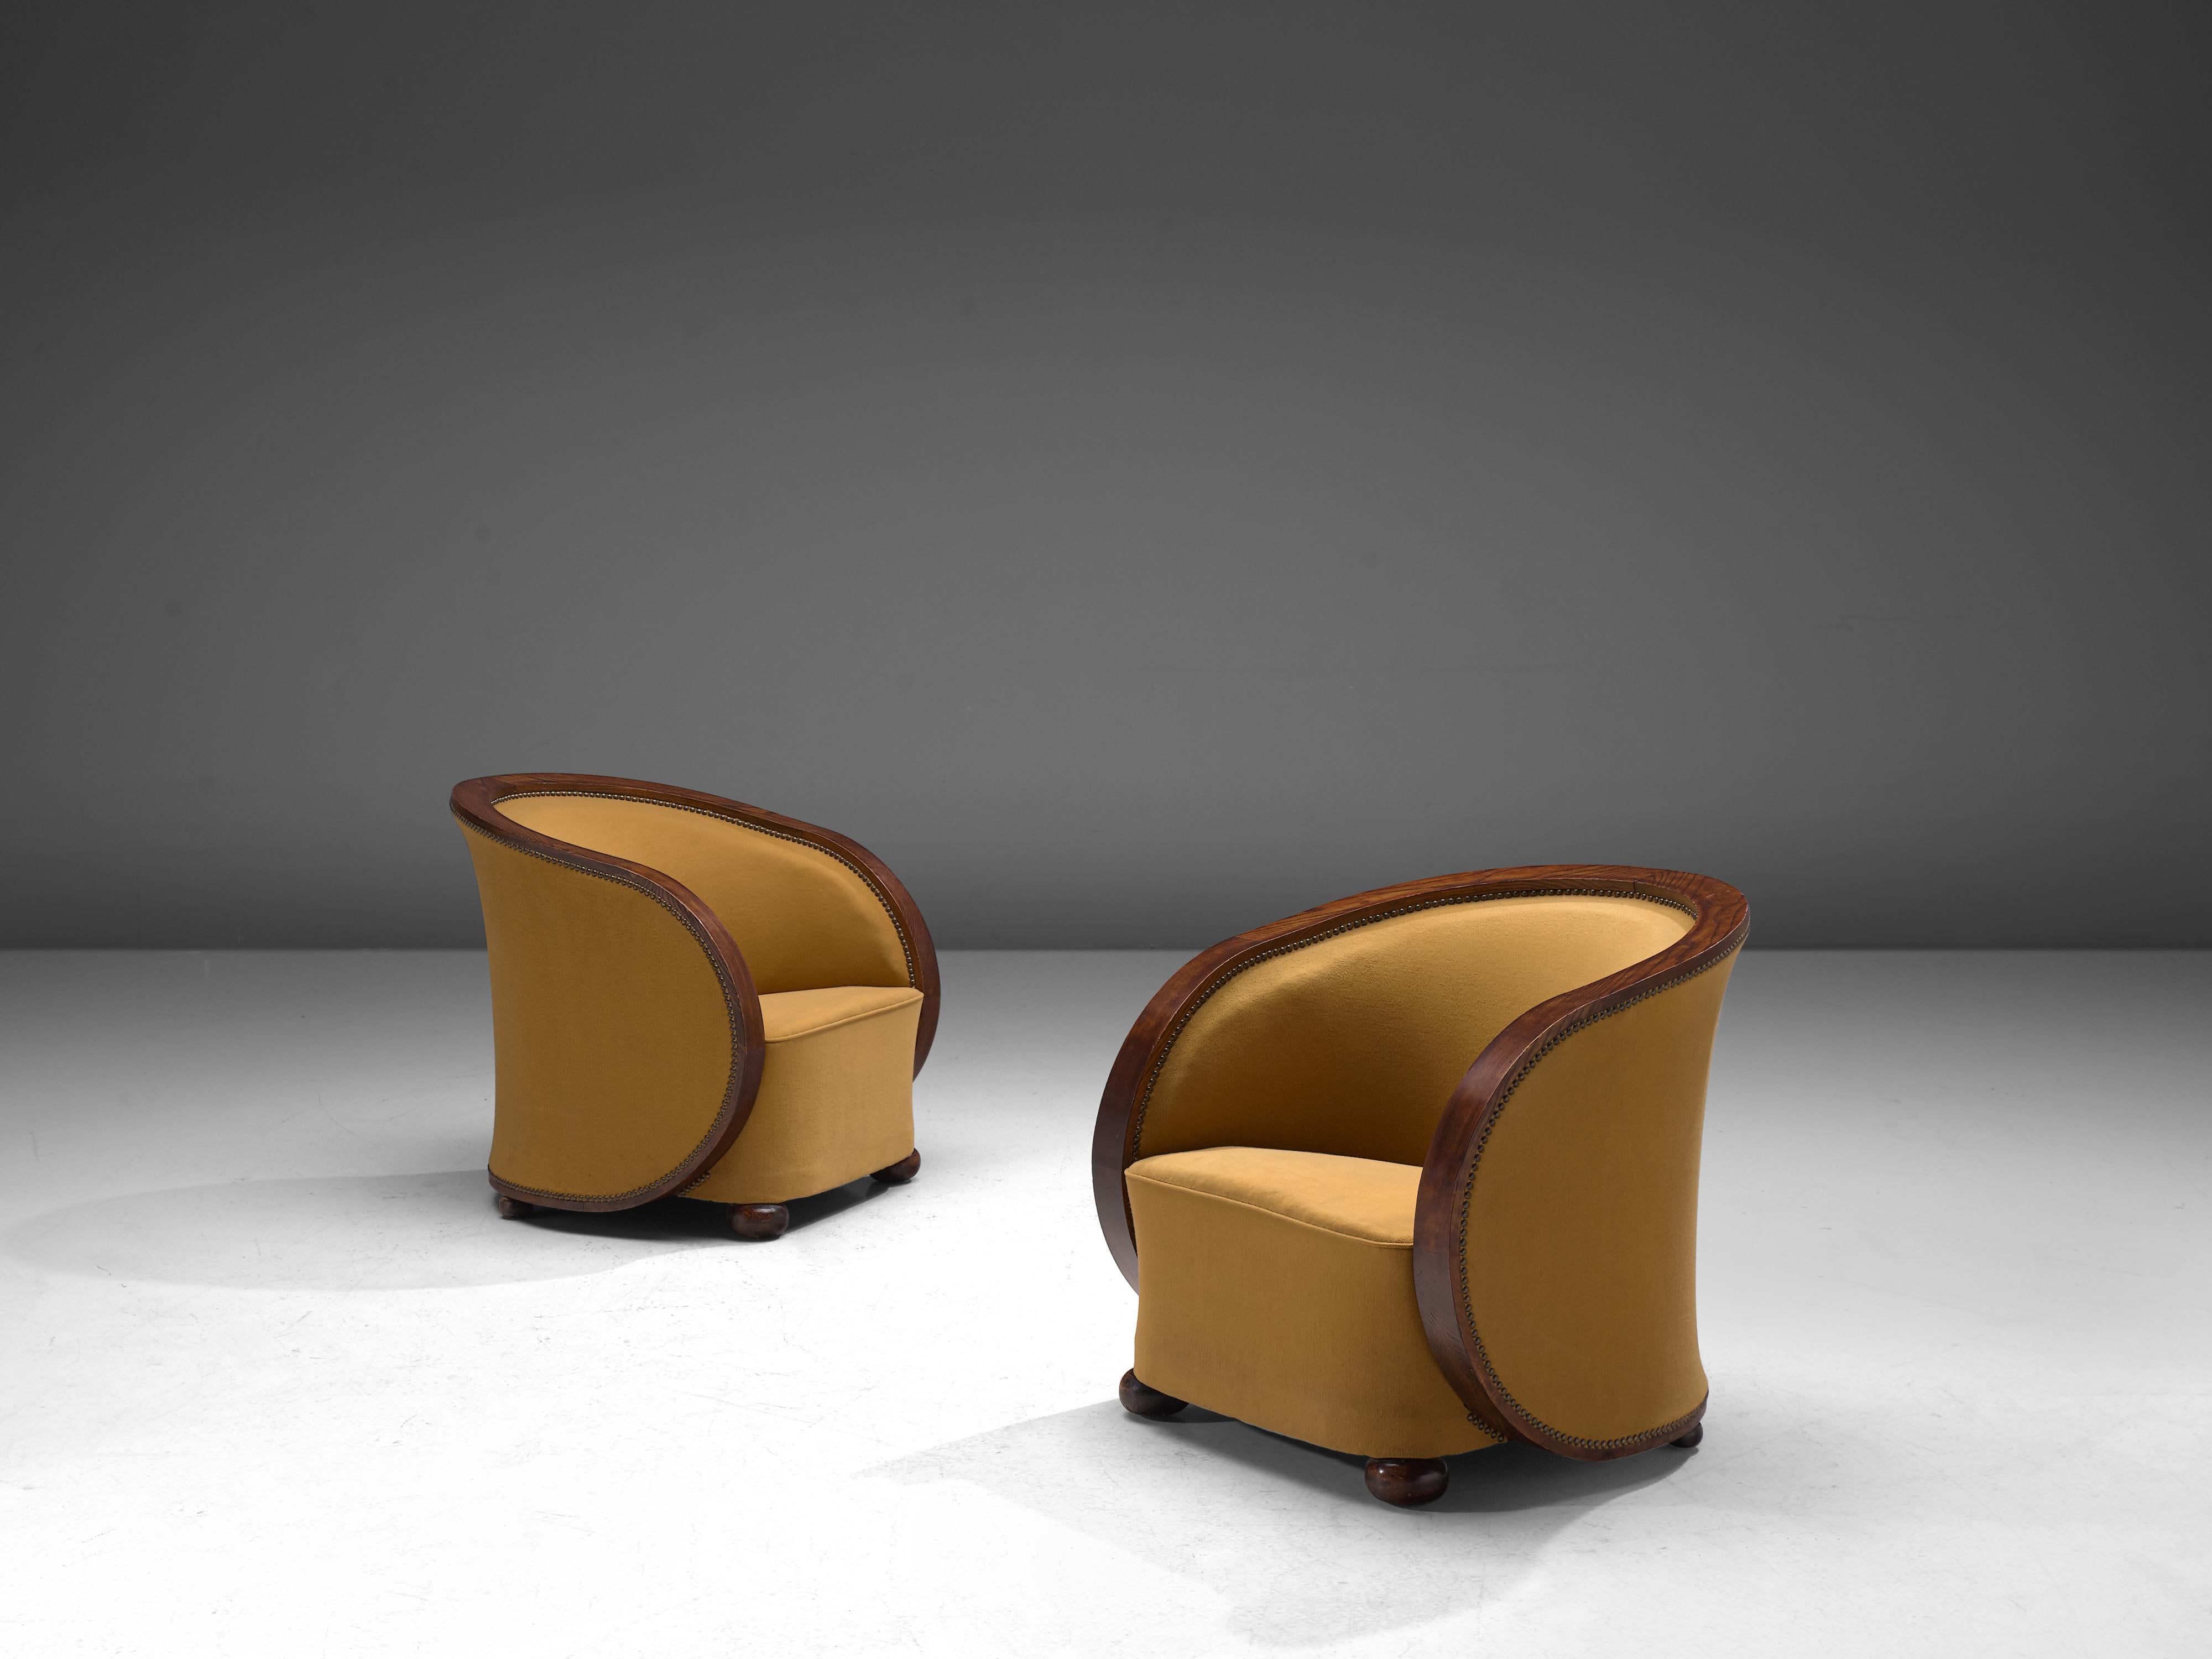 Pair of lounge chairs, wood and fabric, France, 1940s.

Beautifully Art Deco club chairs made from bentwood and fabric. The chairs have an elegant, almost theatrical appearance thanks to its round forms, emphasized by the wooden curved slat that